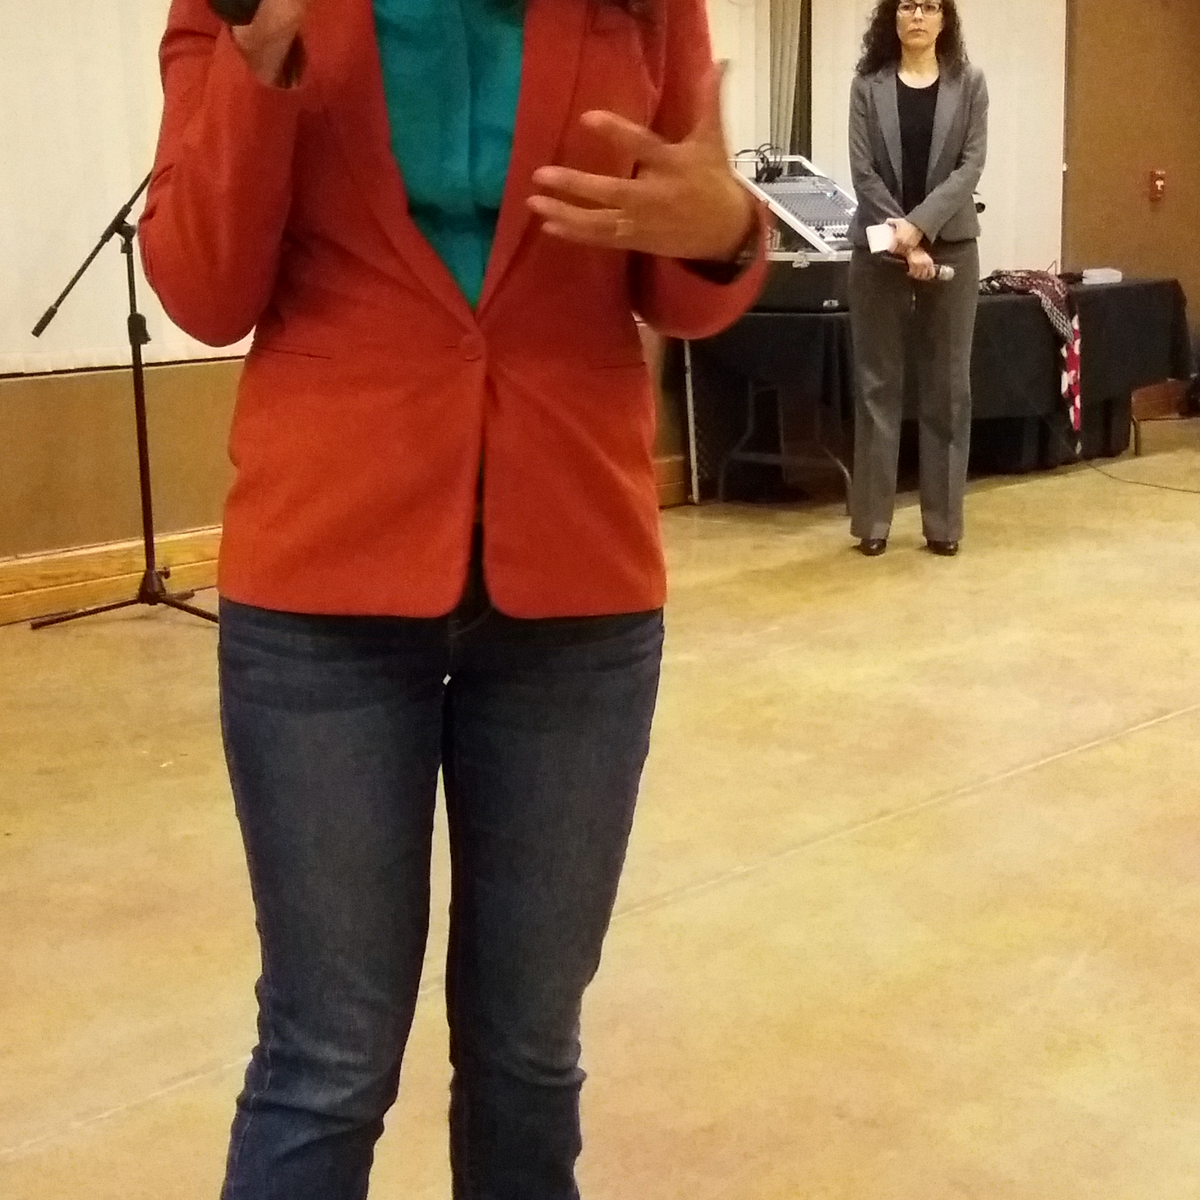 Rep. Xochitl Torres Small Talks Border, Trade and More at Las Cruces Town Hall